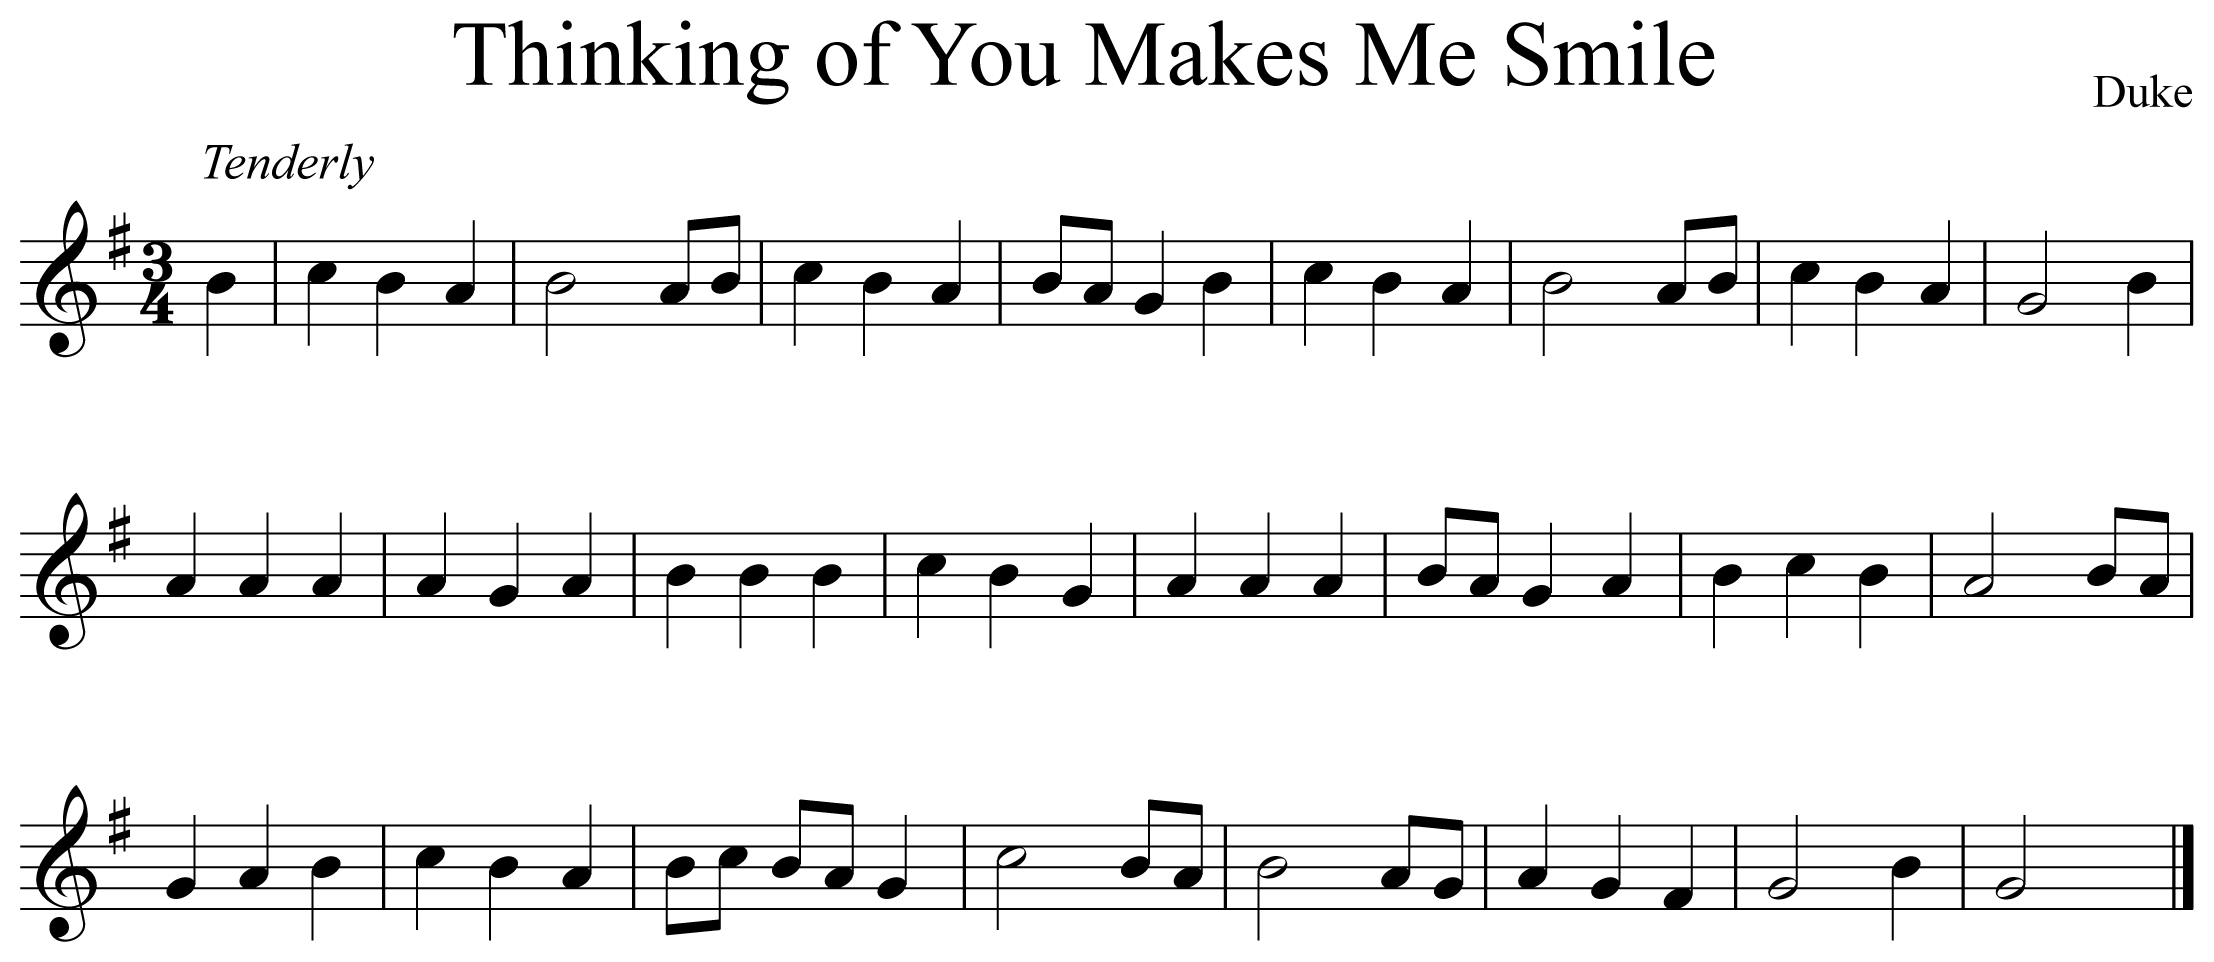 Thinking of You Makes Me Smile Notation Trumpet